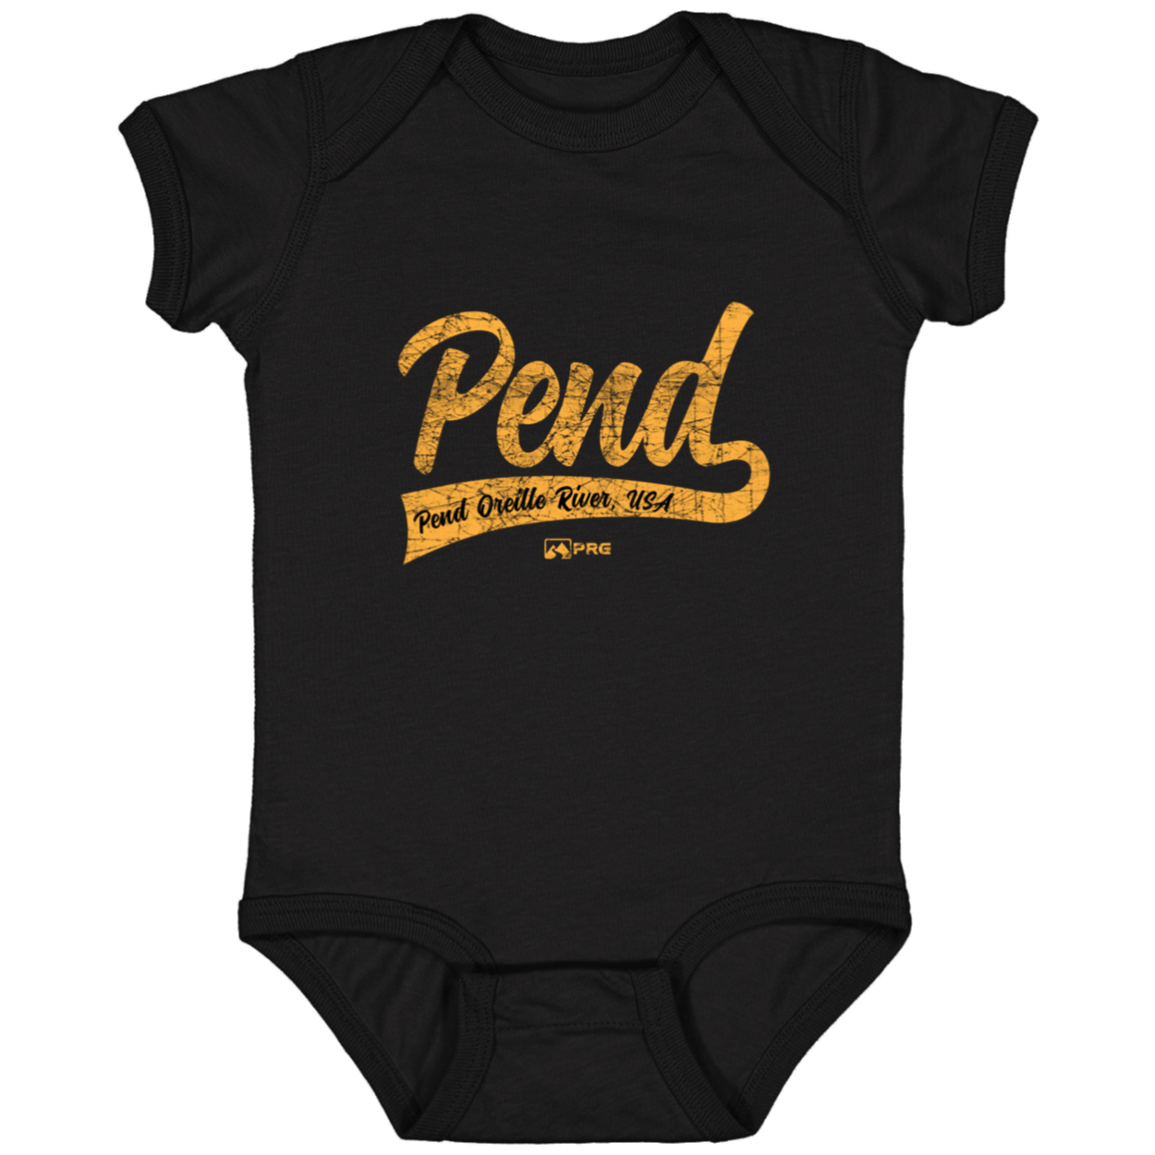 Pend for the Pennant - Infant Onesie